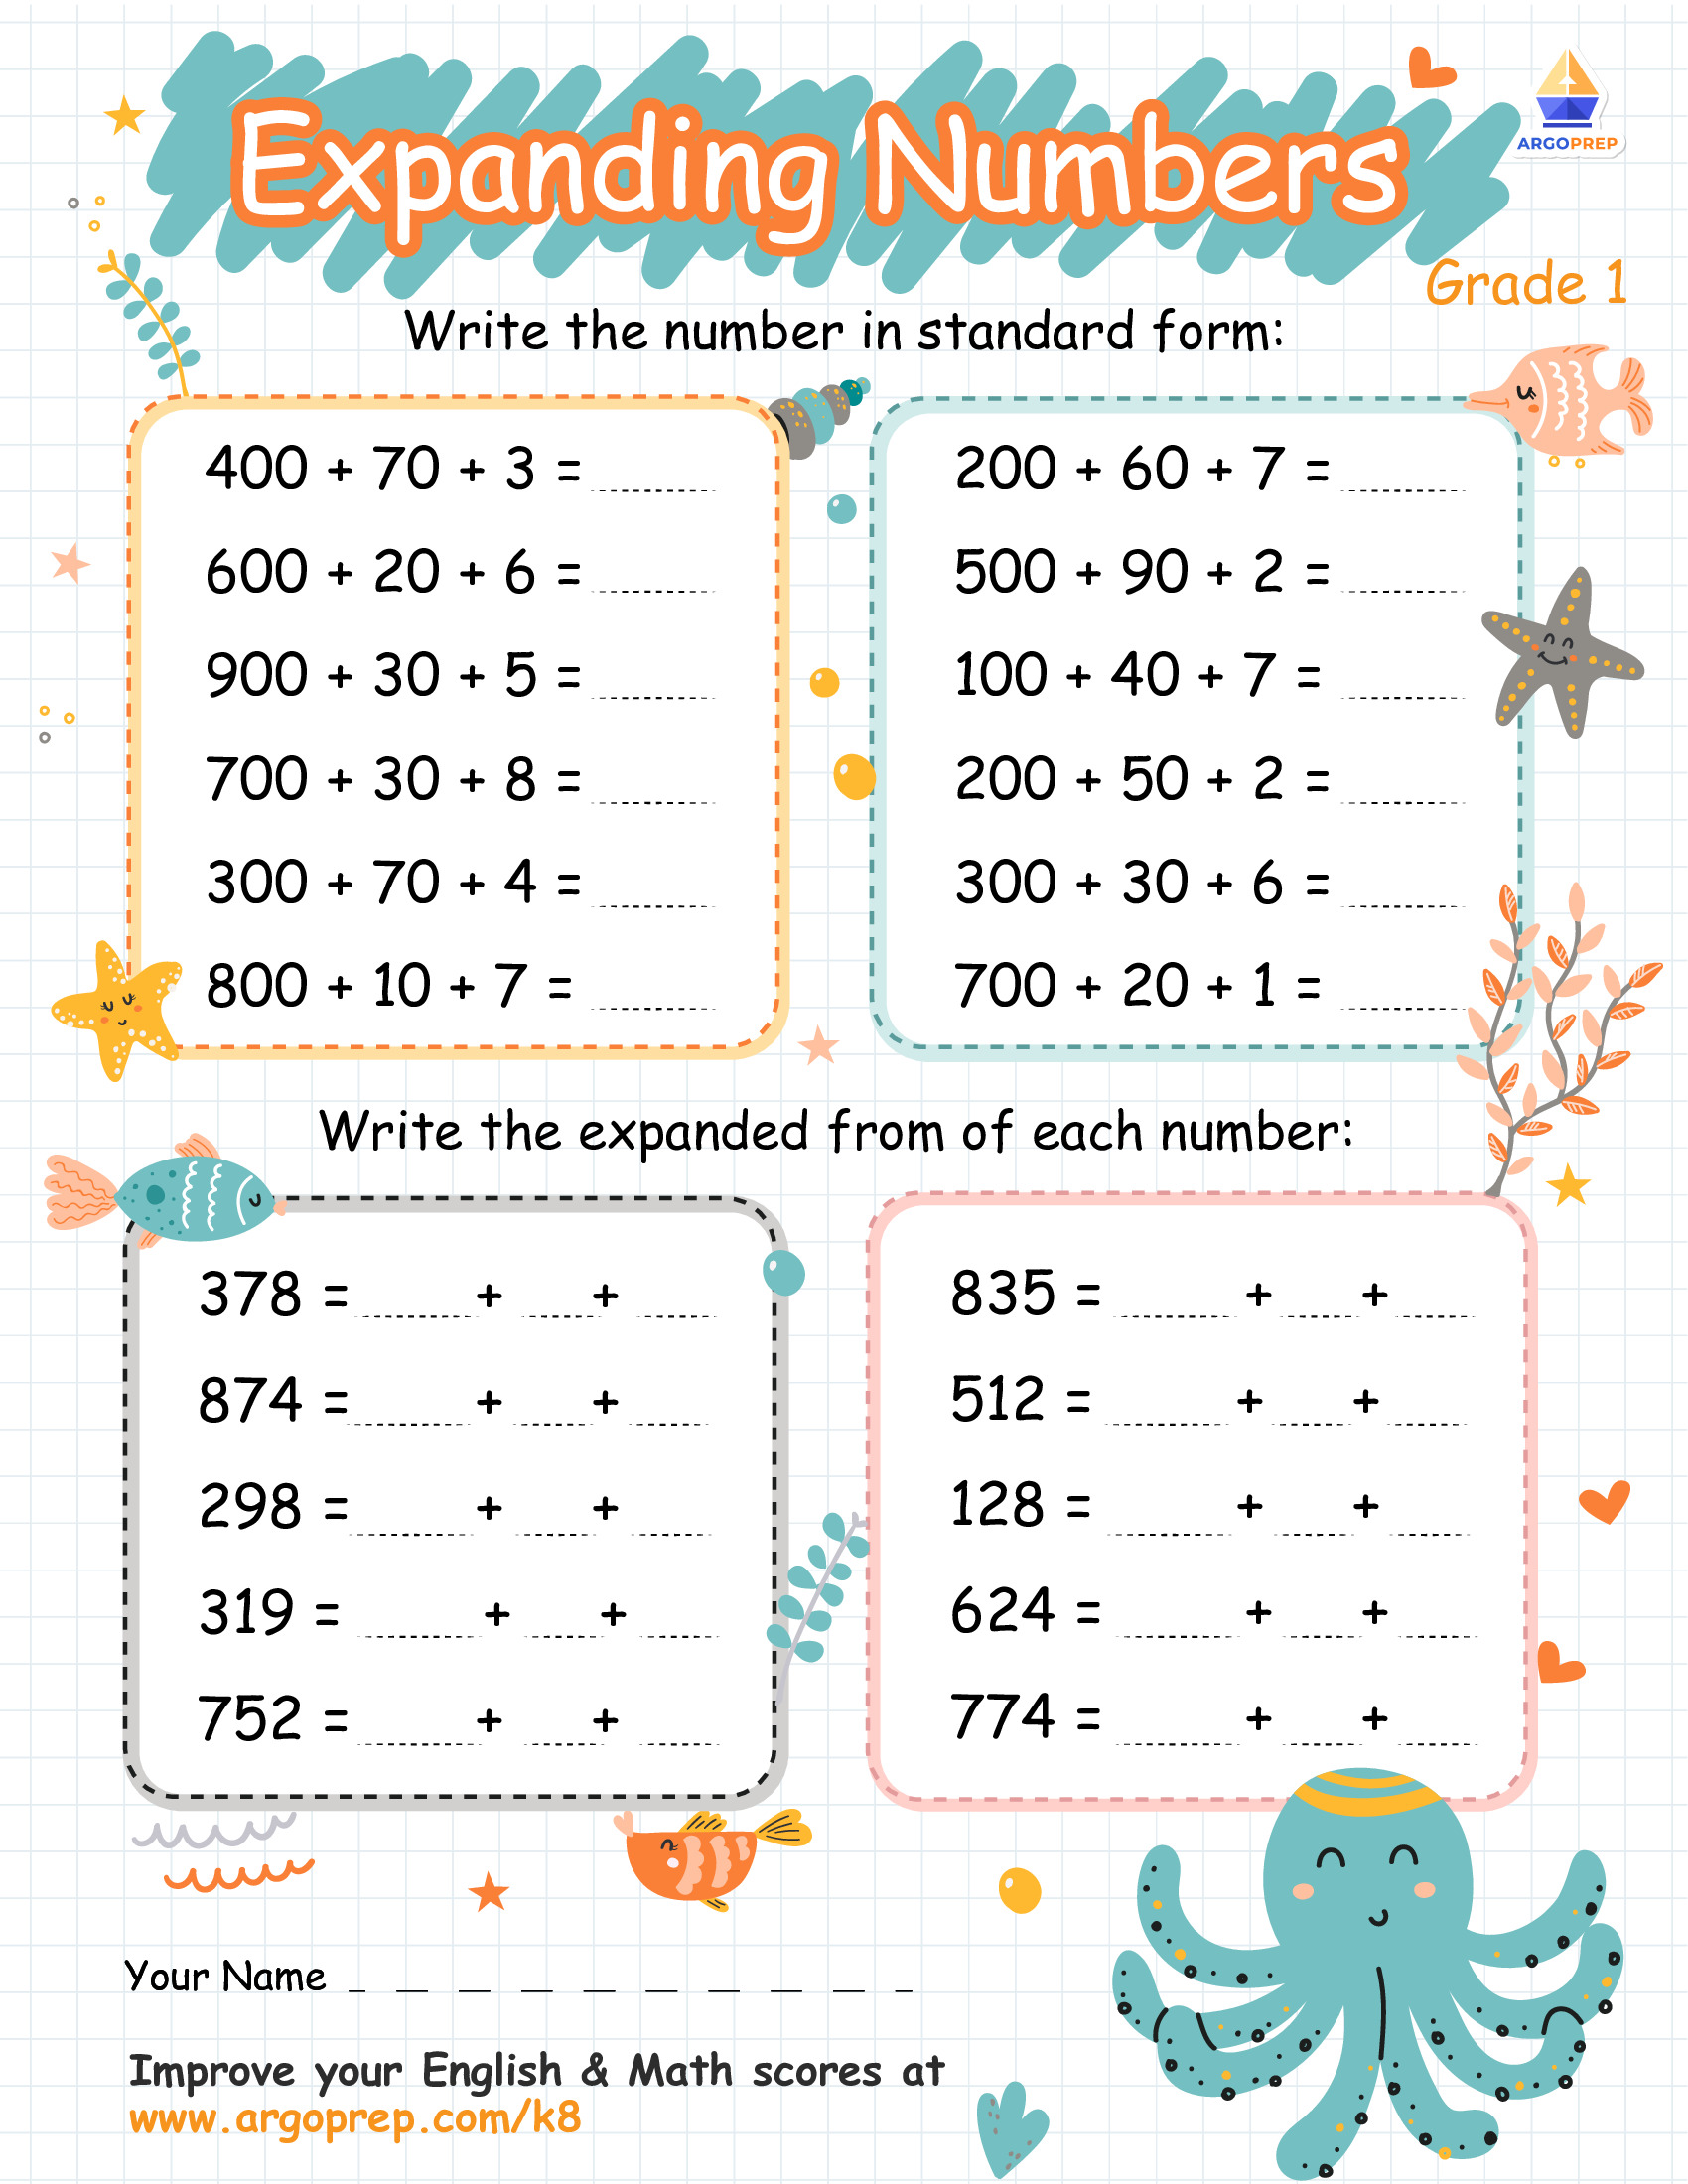 Composing and Decomposing Numbers with Gentle Octopus - ArgoPrep Within Composing And Decomposing Numbers Worksheet